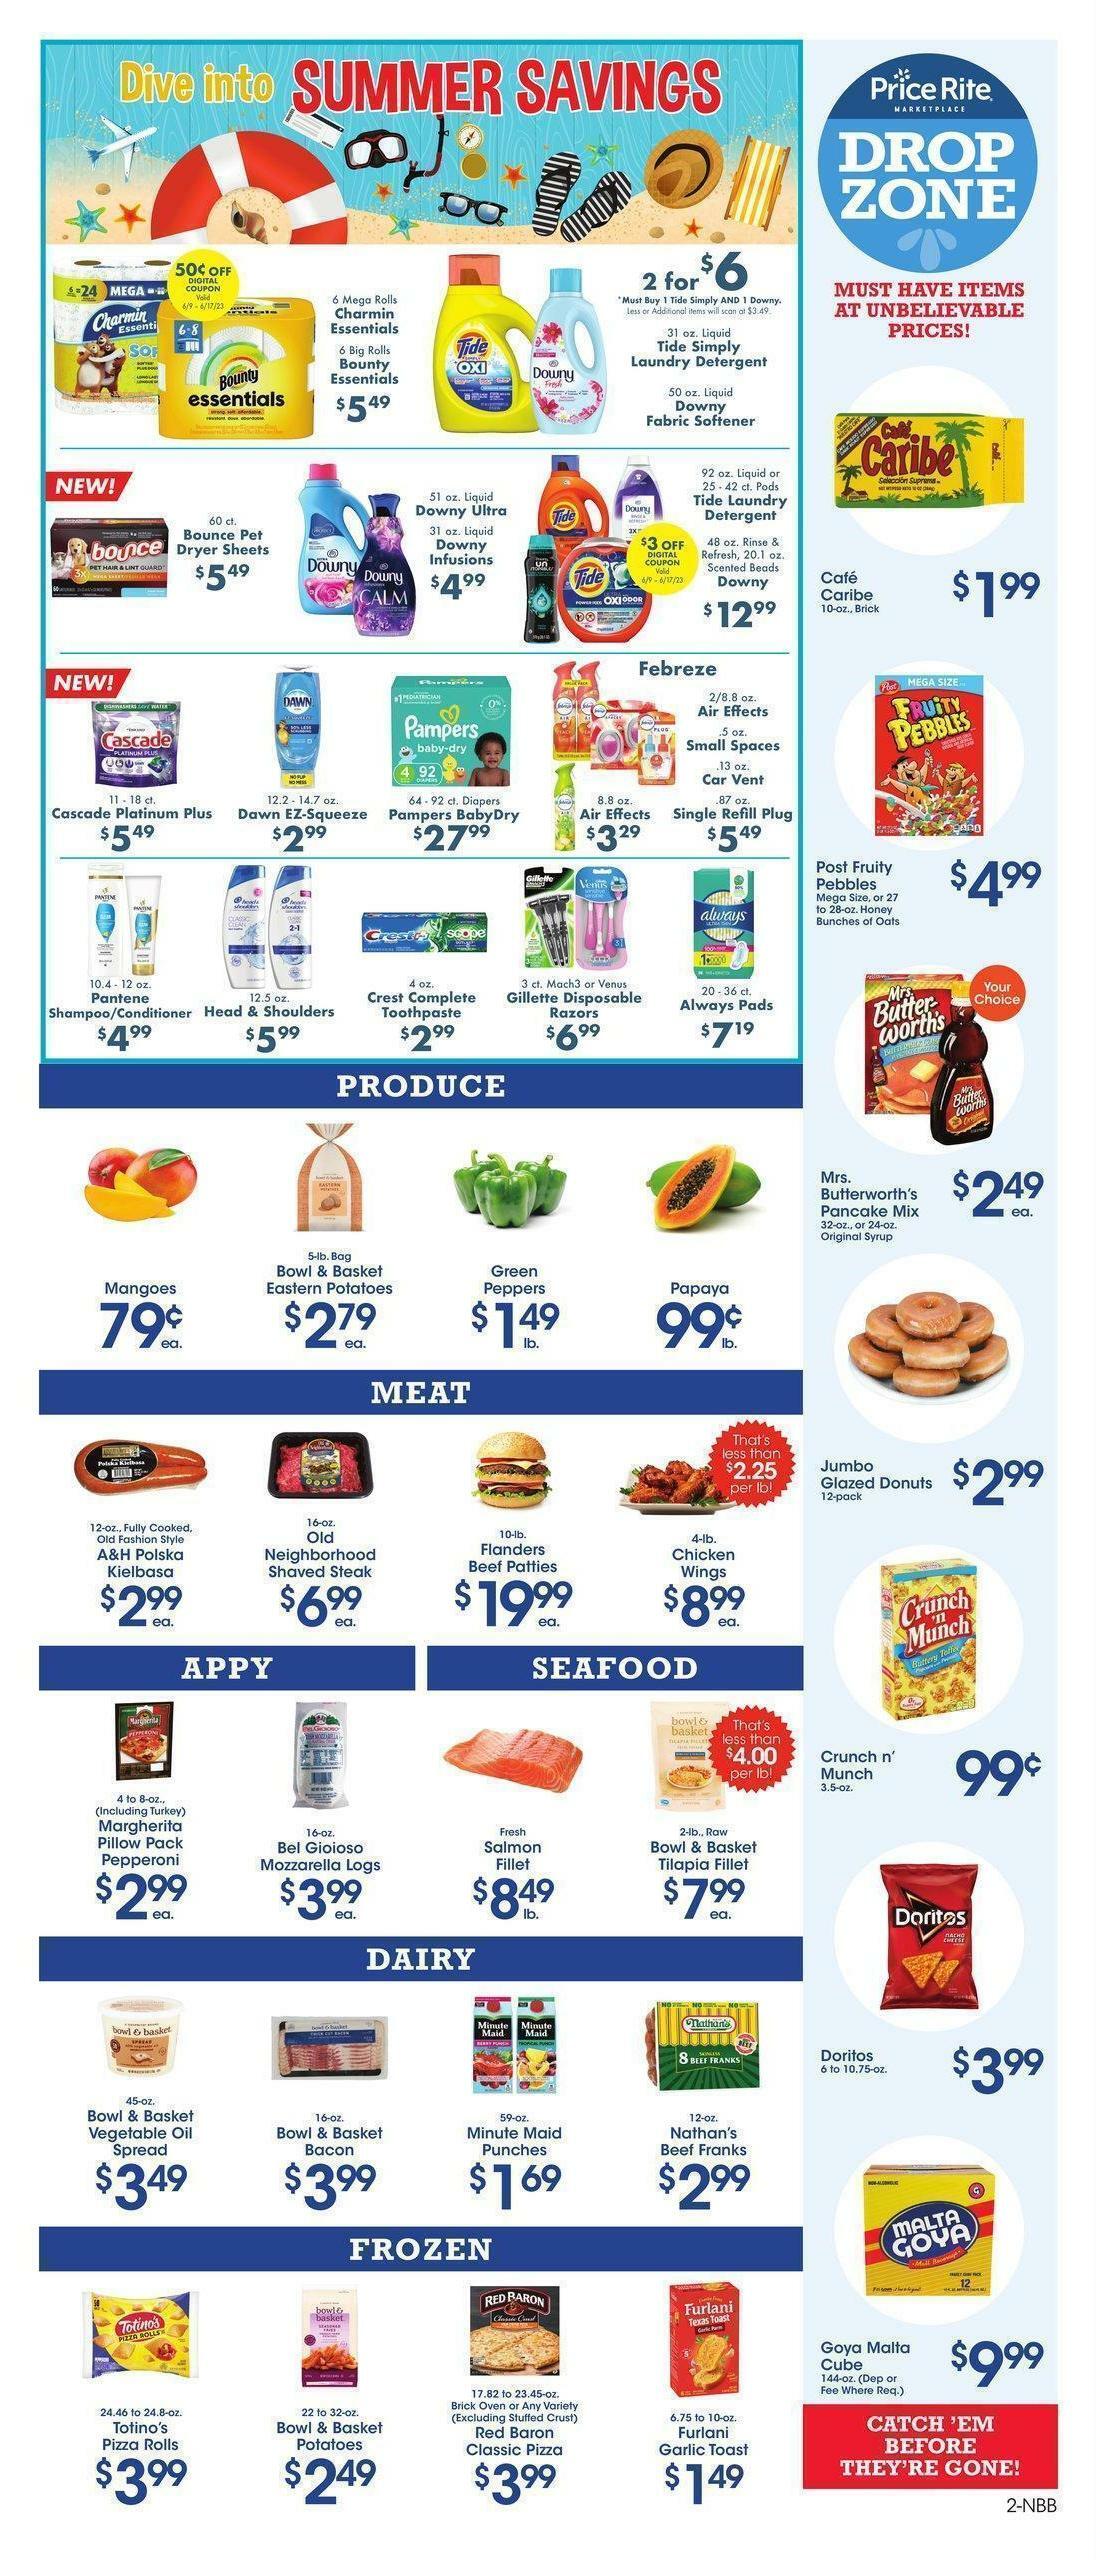 Price Rite Weekly Ad from June 9